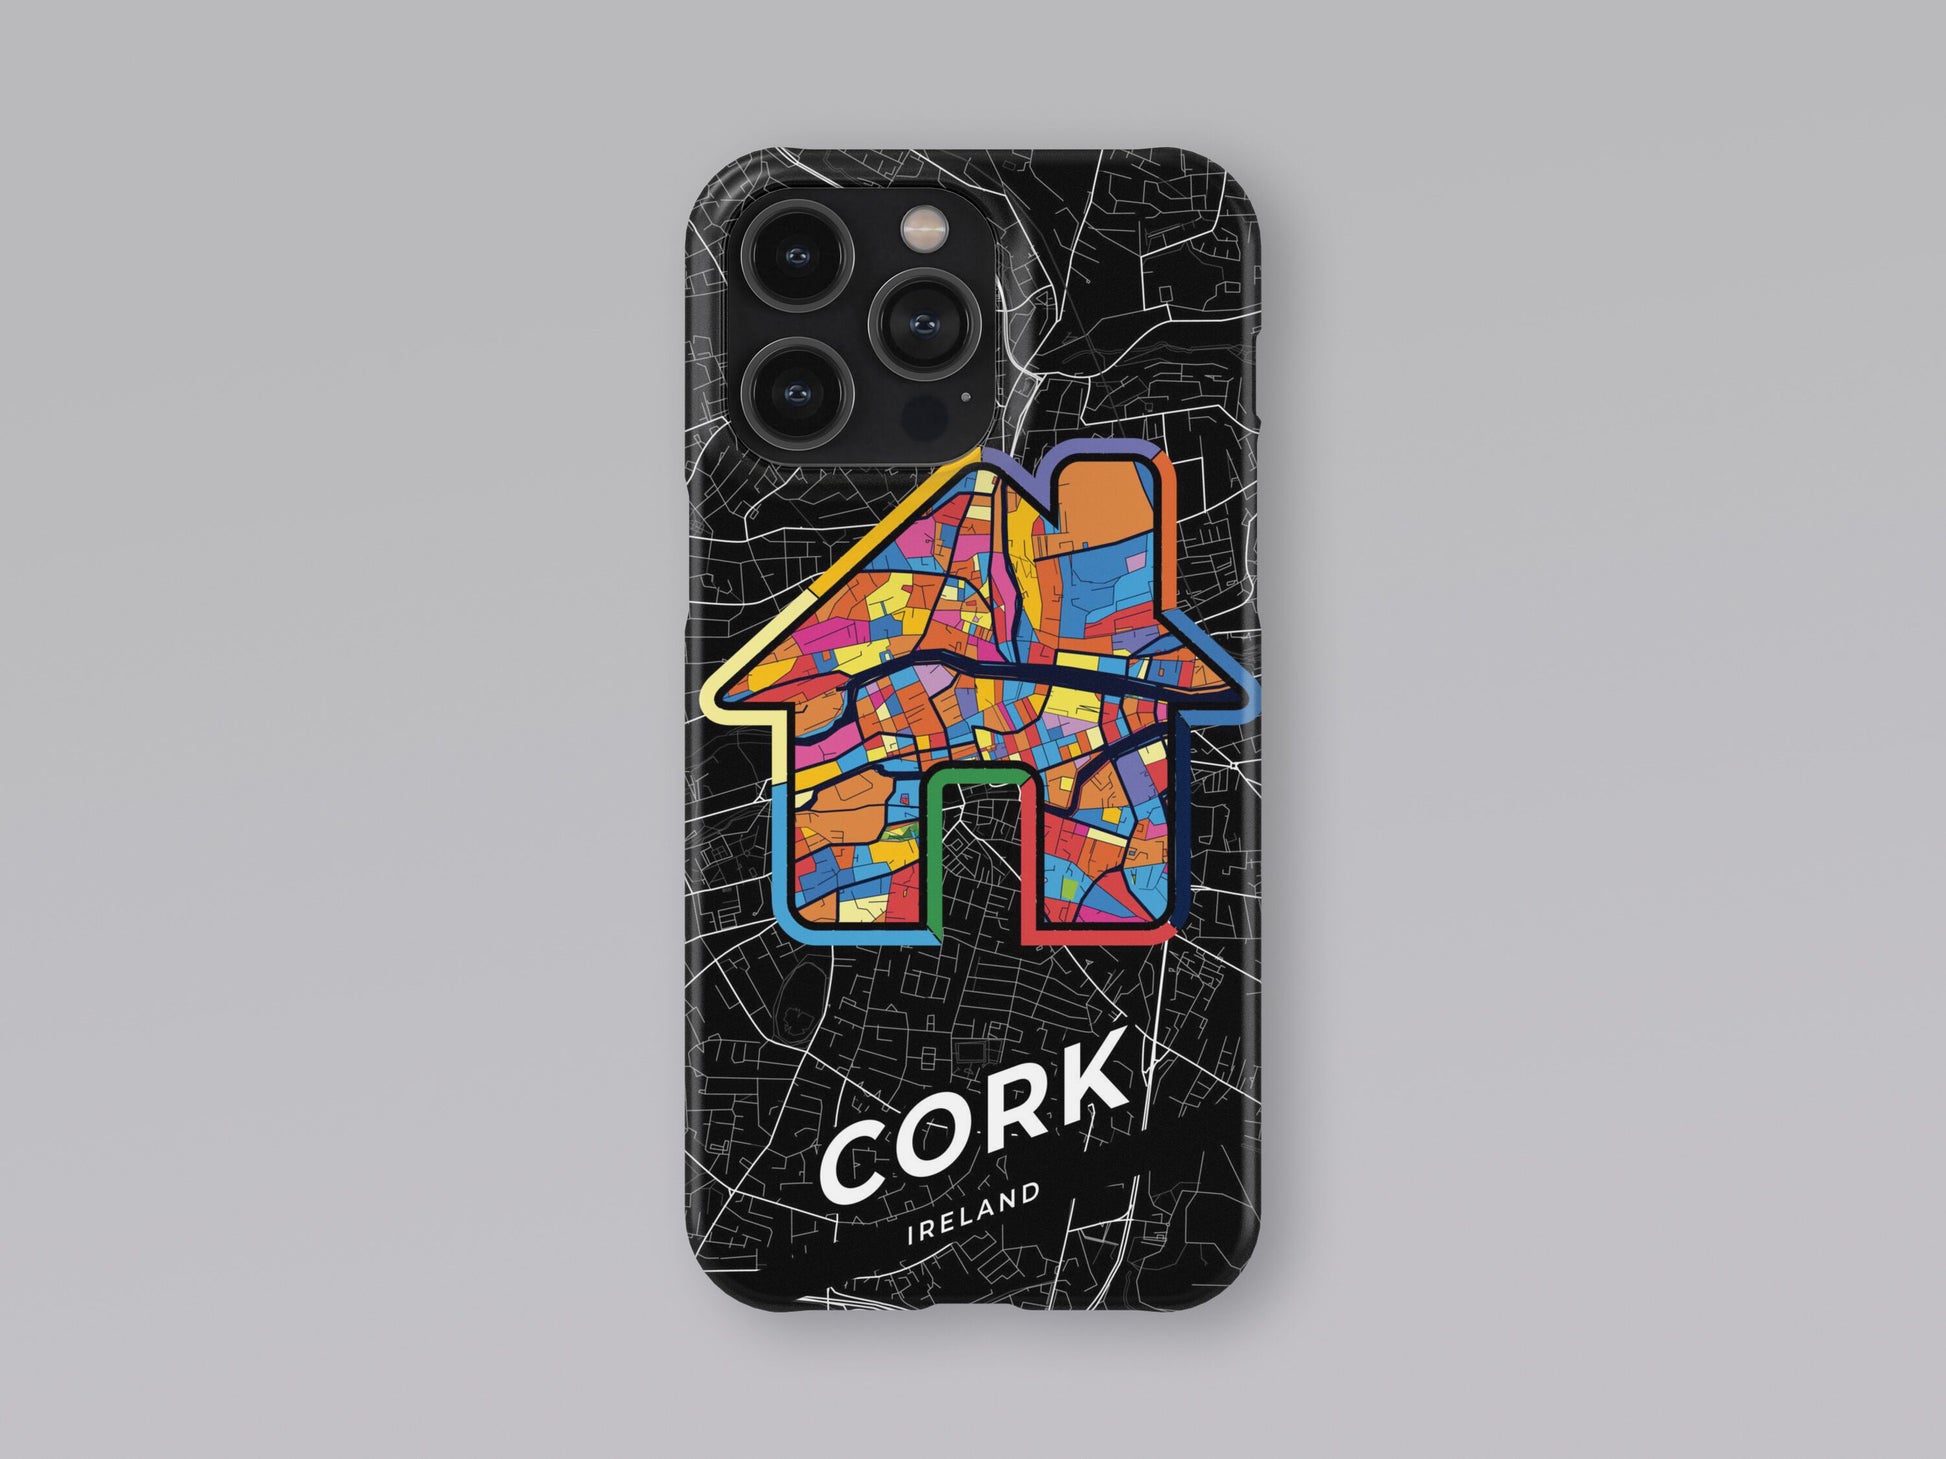 Cork Ireland slim phone case with colorful icon. Birthday, wedding or housewarming gift. Couple match cases. 3